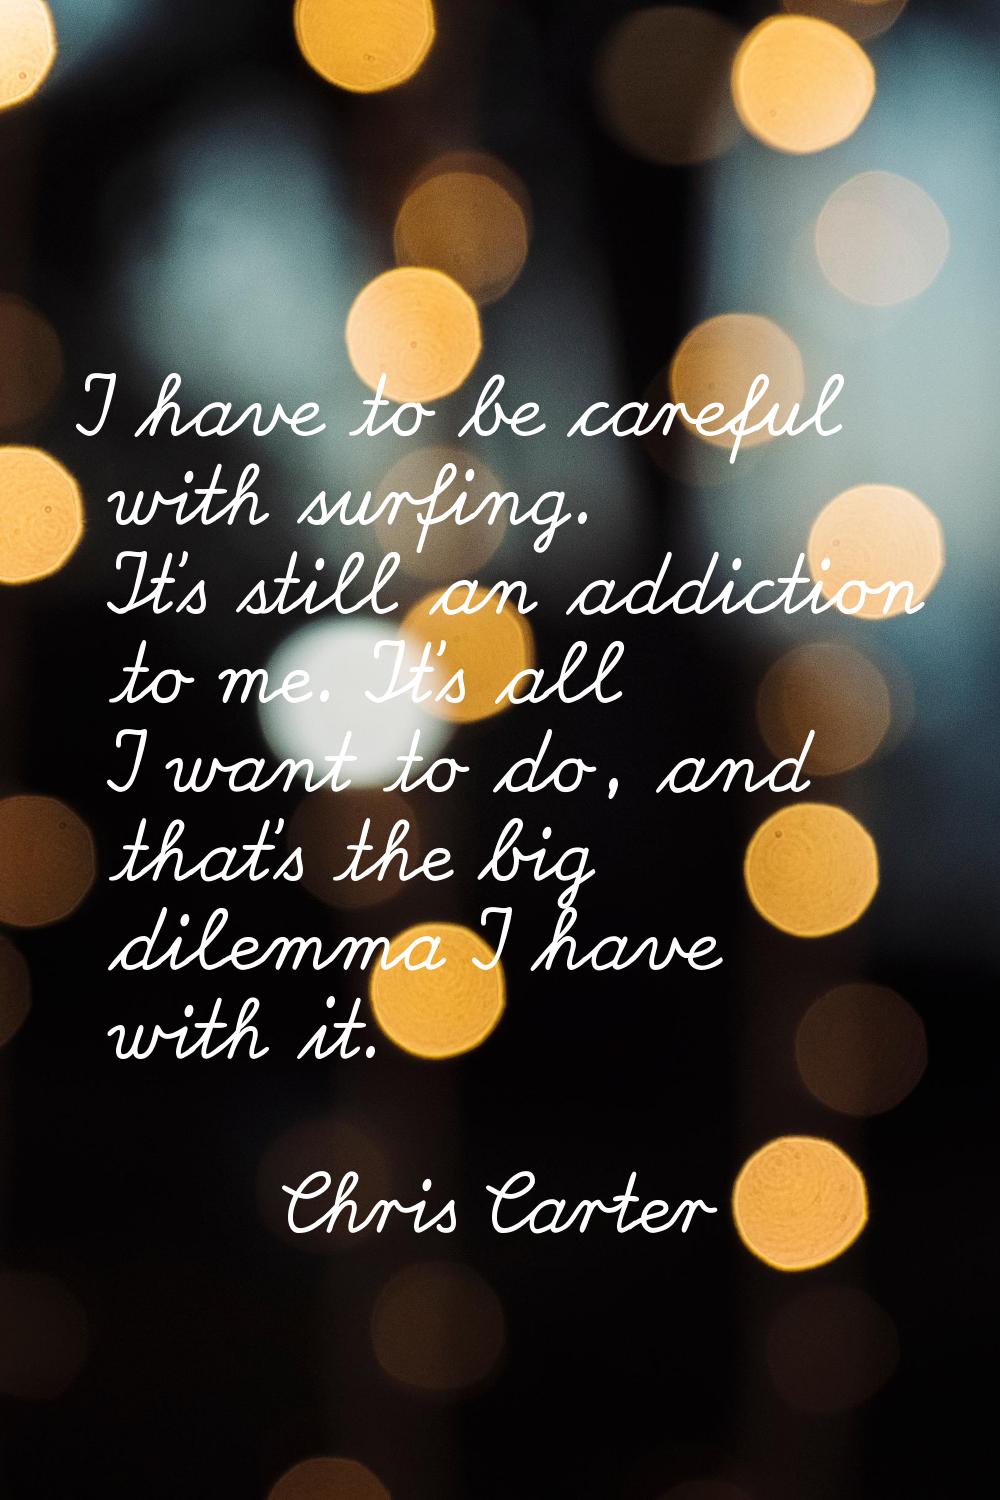 I have to be careful with surfing. It's still an addiction to me. It's all I want to do, and that's